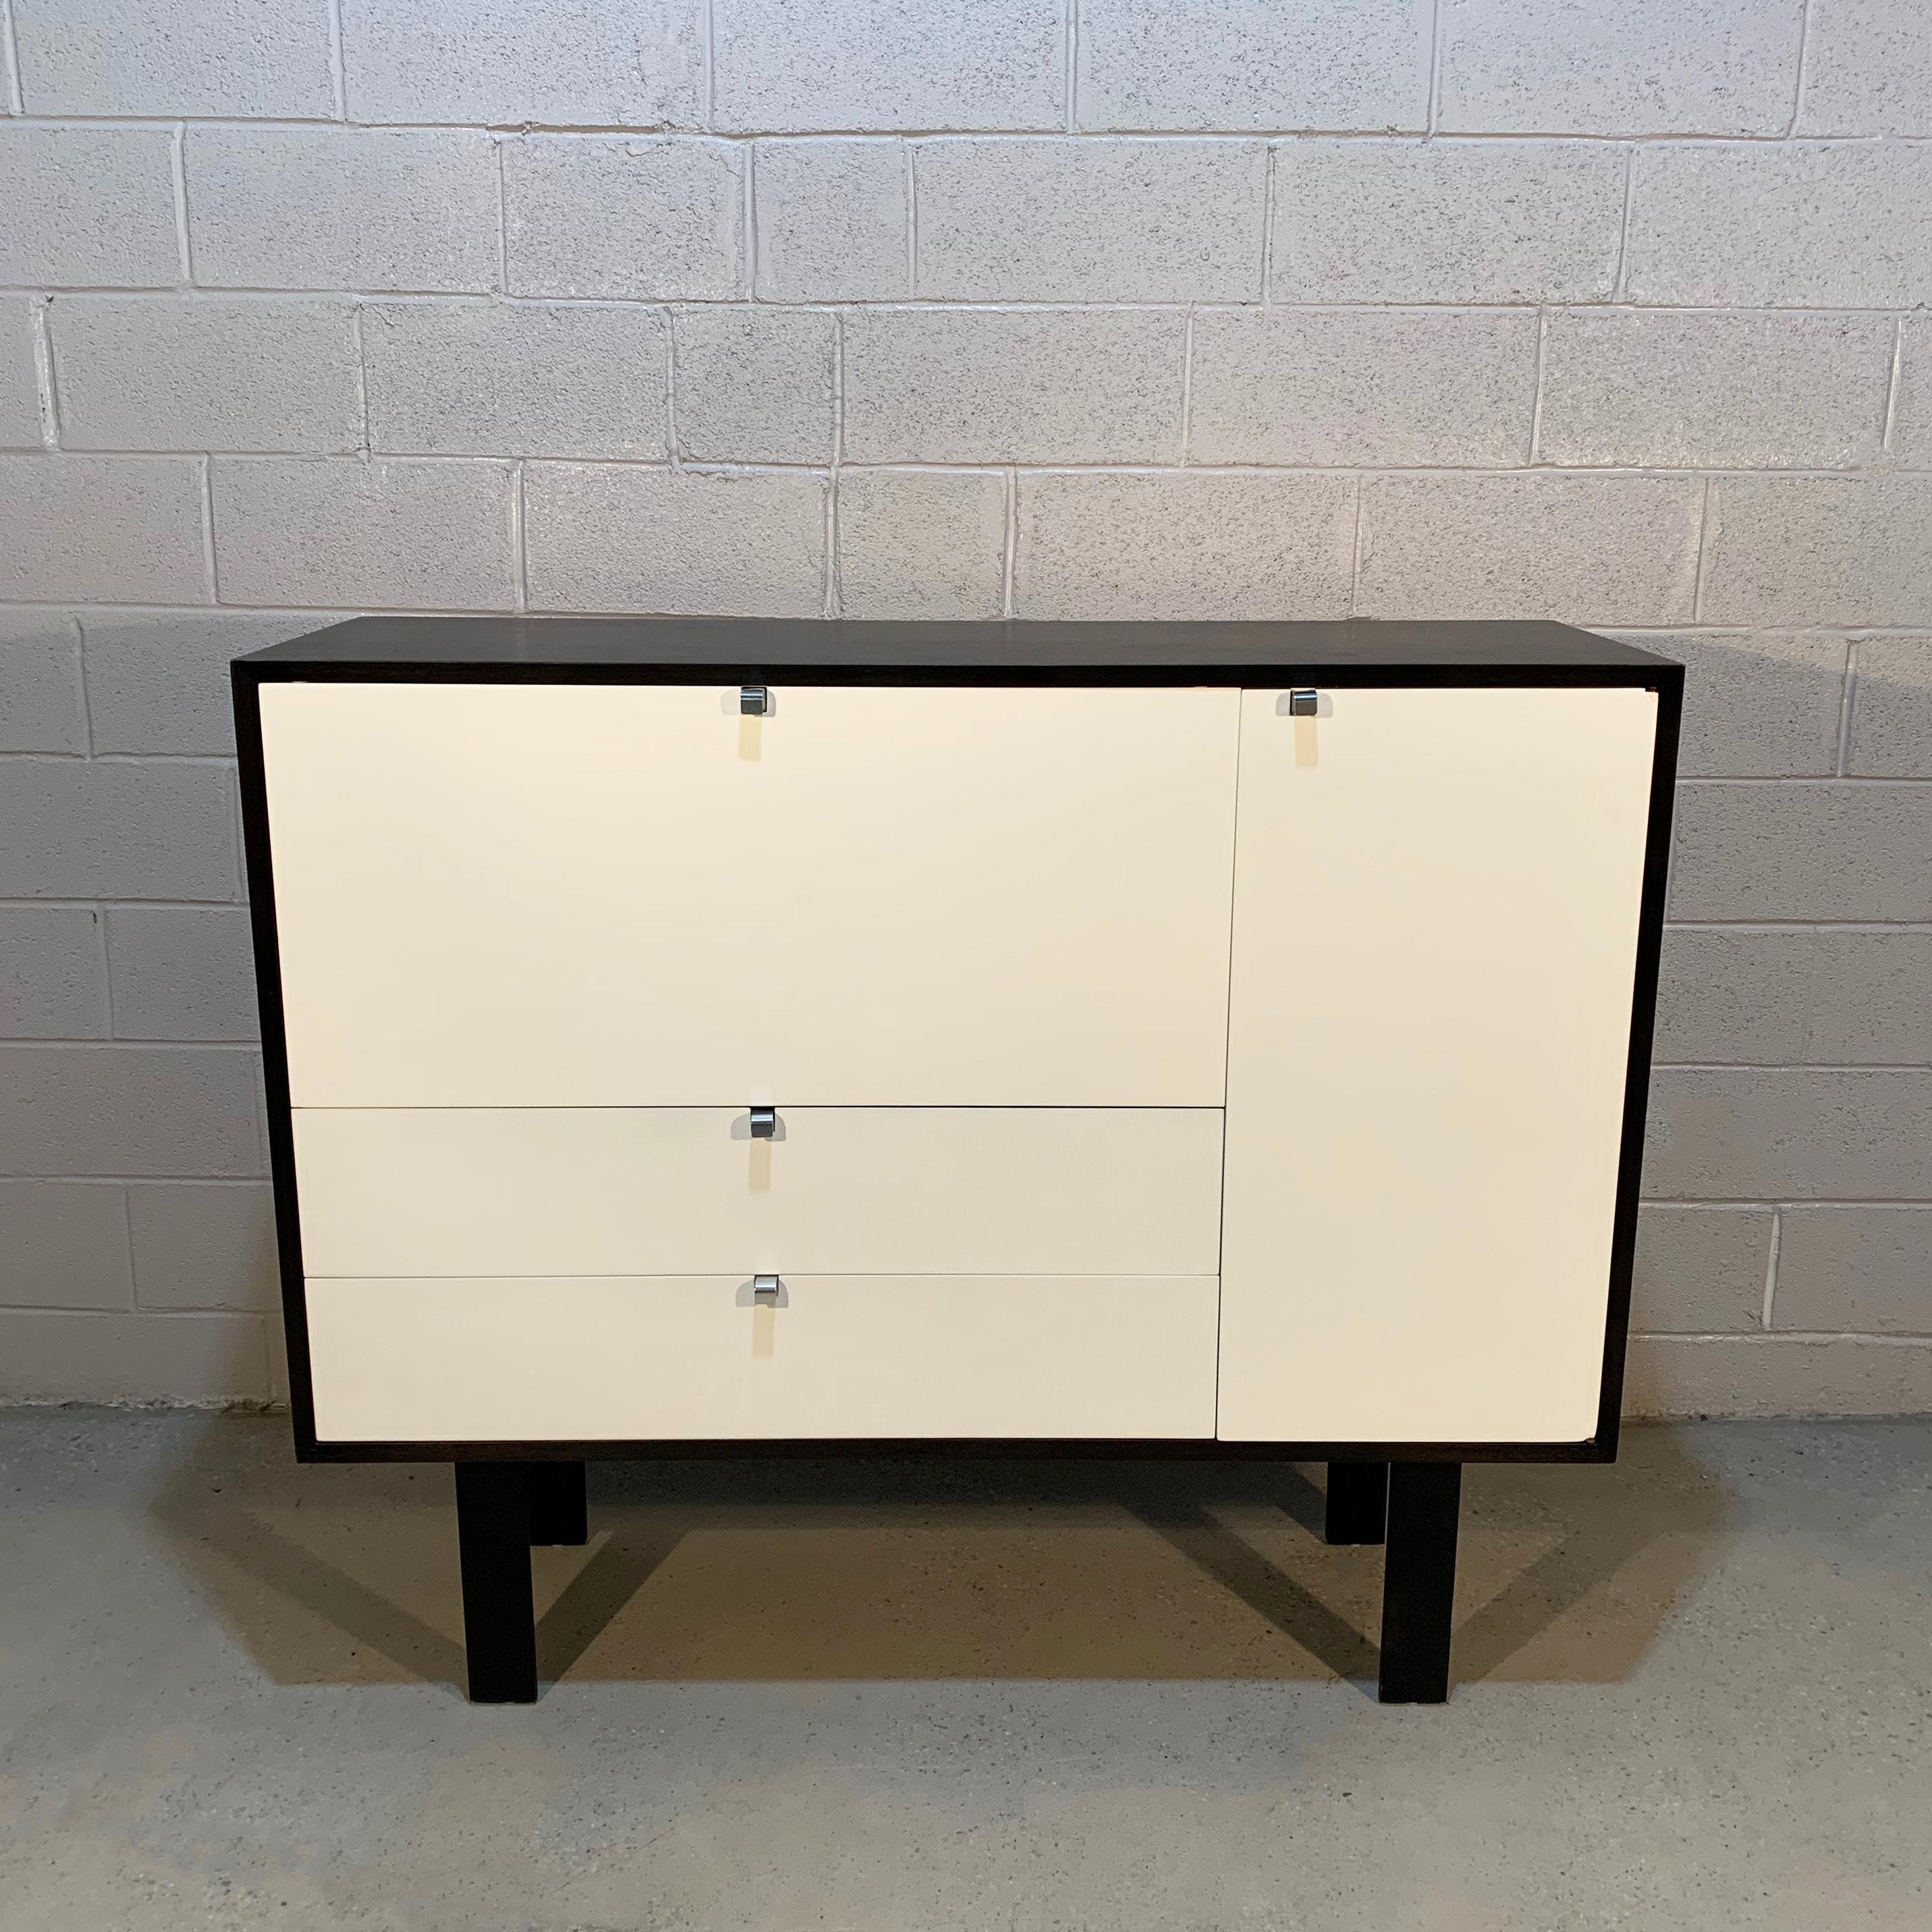 Mid-Century Modern, walnut, secretary cabinet by George Nelson for Herman Miller features a custom finish with white fronts framed in contrasting black with aluminum j pulls.